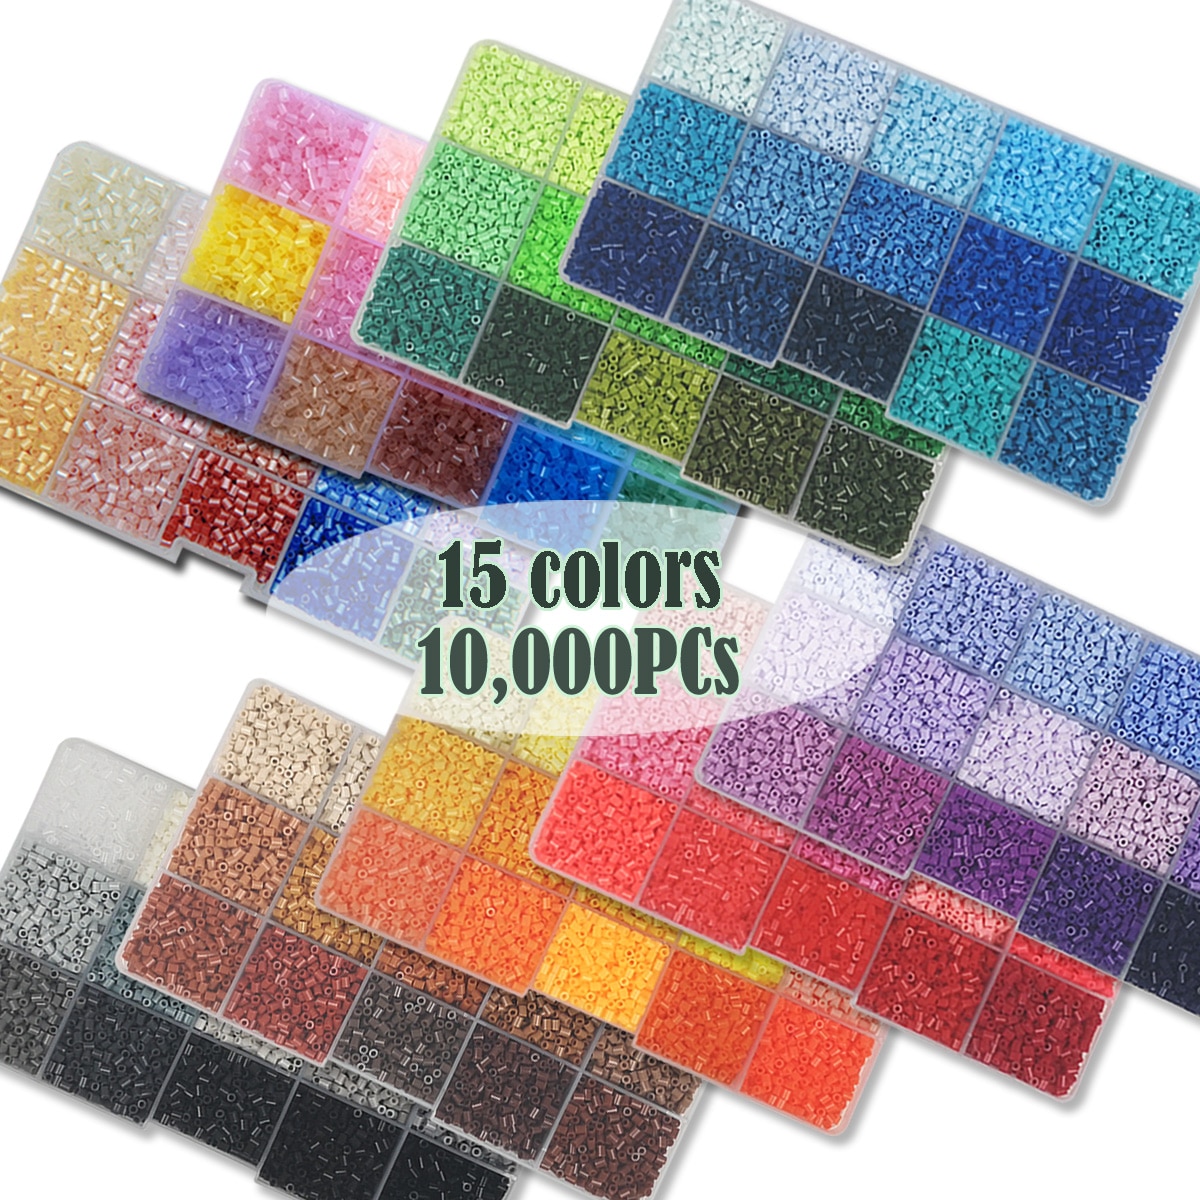 15color 10,000PCS 2.6mm mini beads Hama Beads Iron Beads Pixel Art Puzzle High Quality Gift For Child DIY hobbies Children Toys